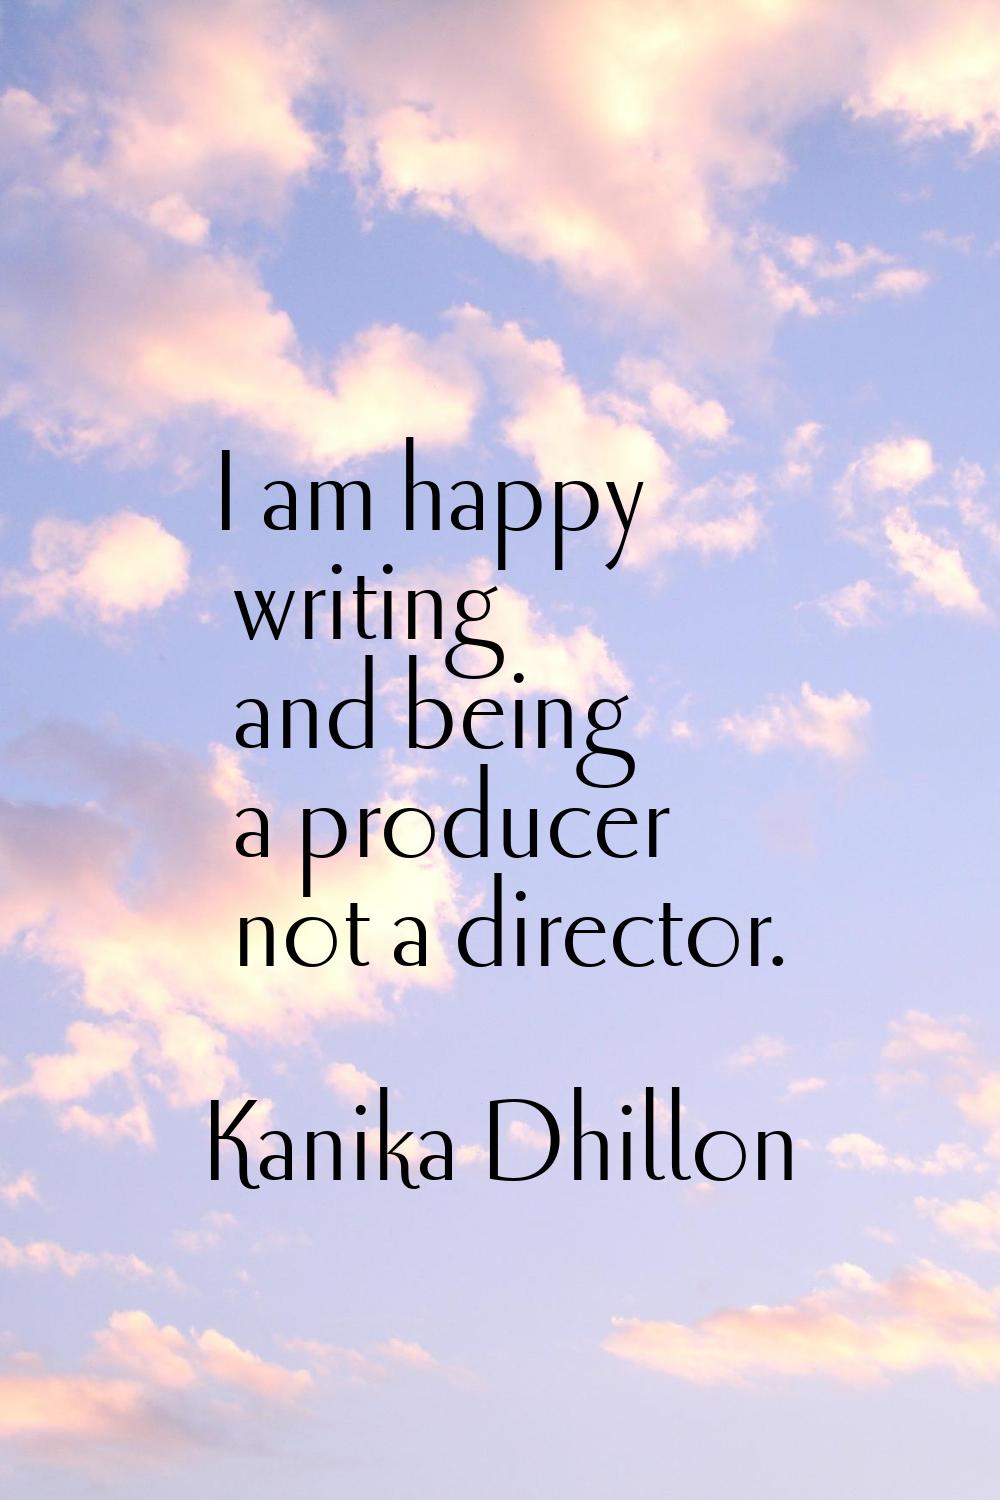 I am happy writing and being a producer not a director.